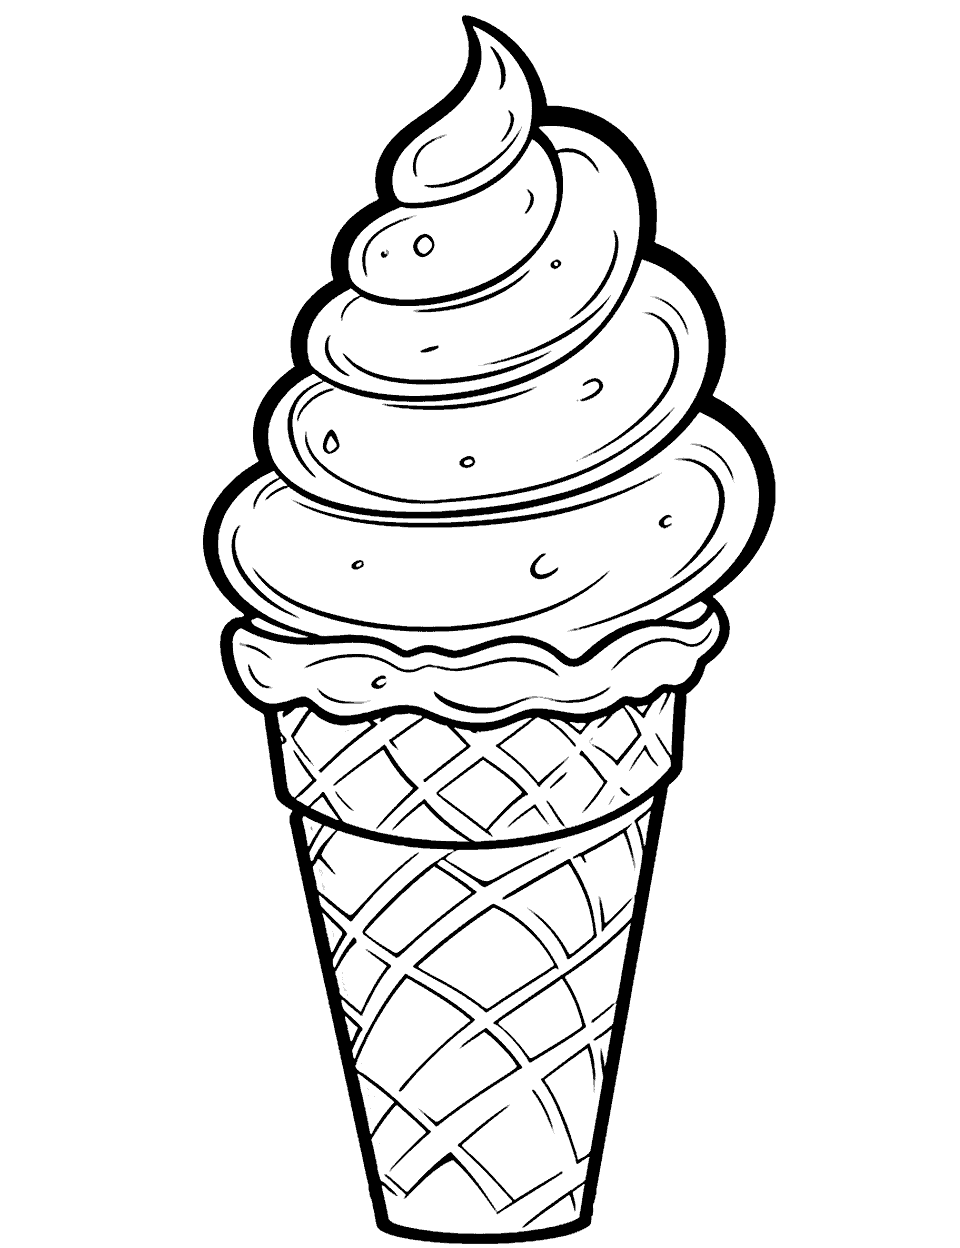 Simple Ice Cream Coloring Page - A simple cone of ice cream.